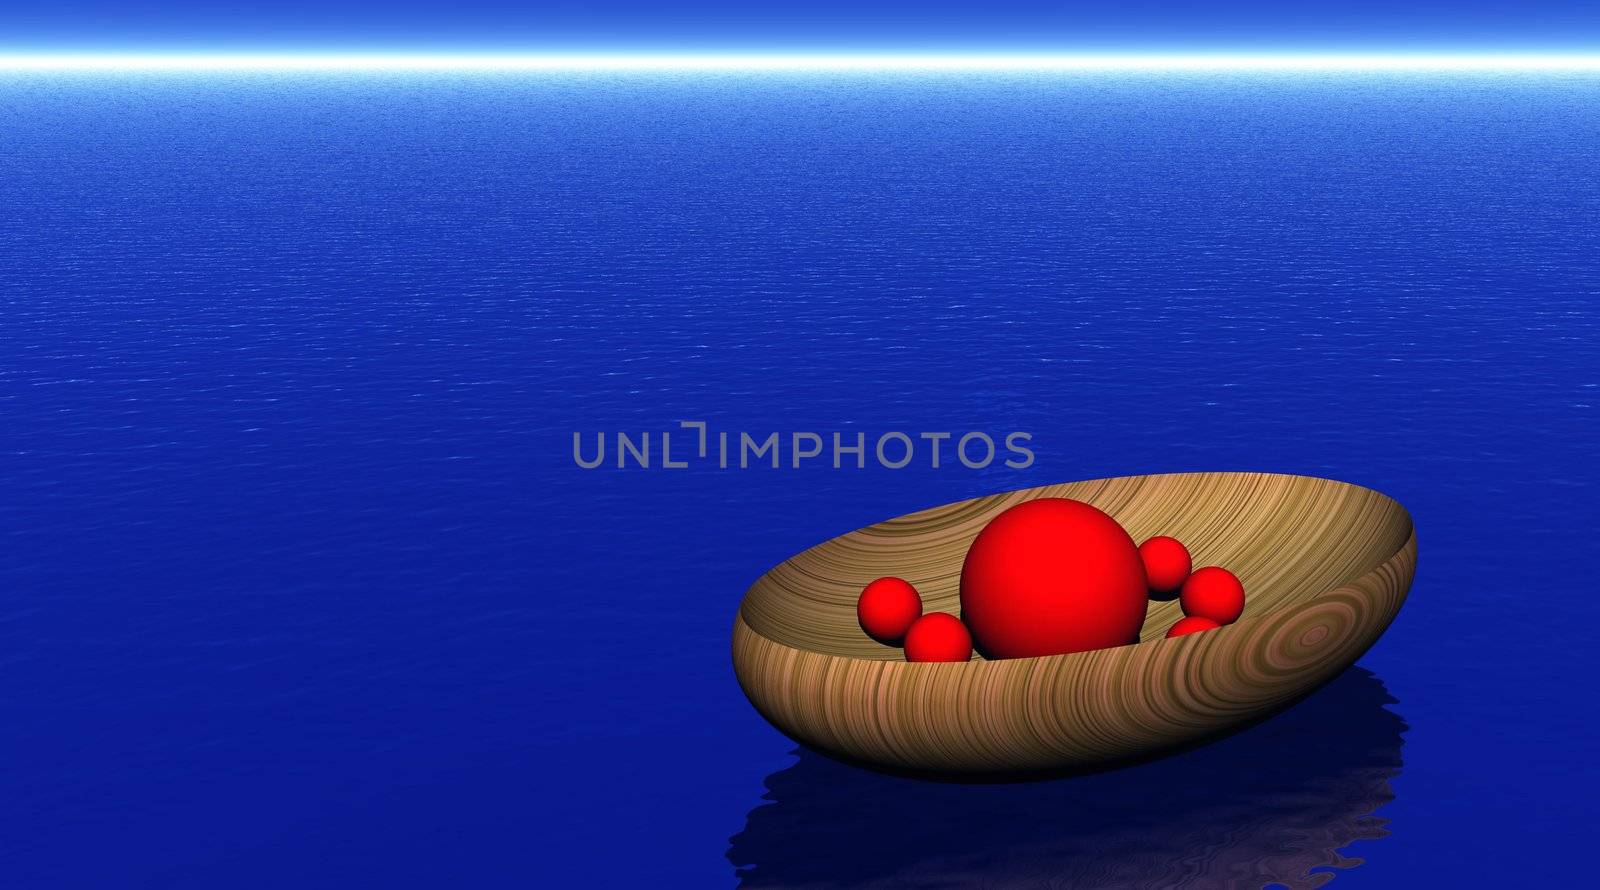 Balls in a boat by Elenaphotos21